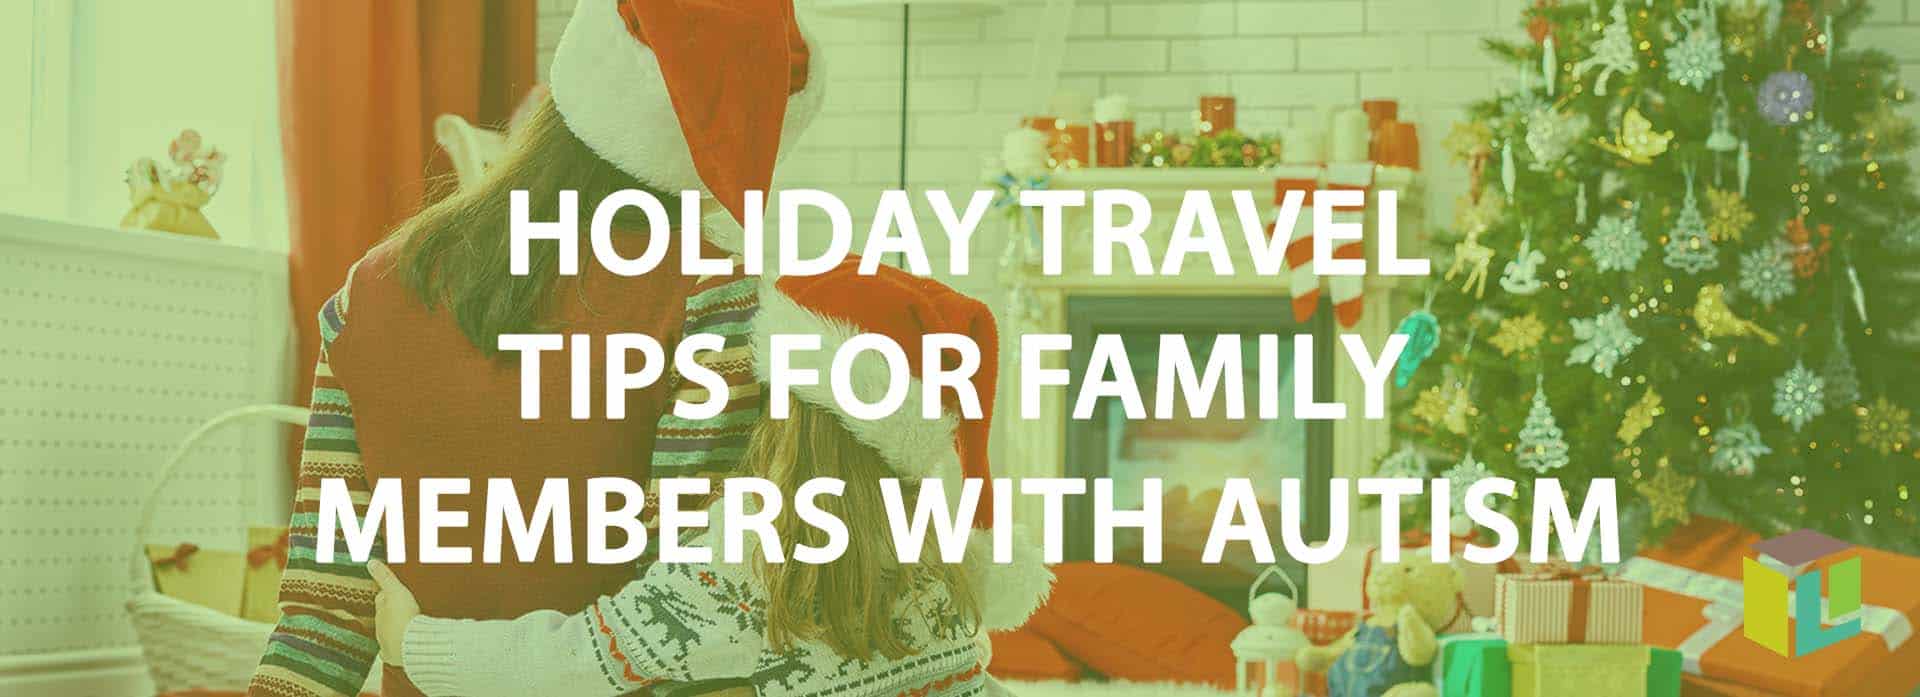 Holiday Travel Tips For Family Members With Autism